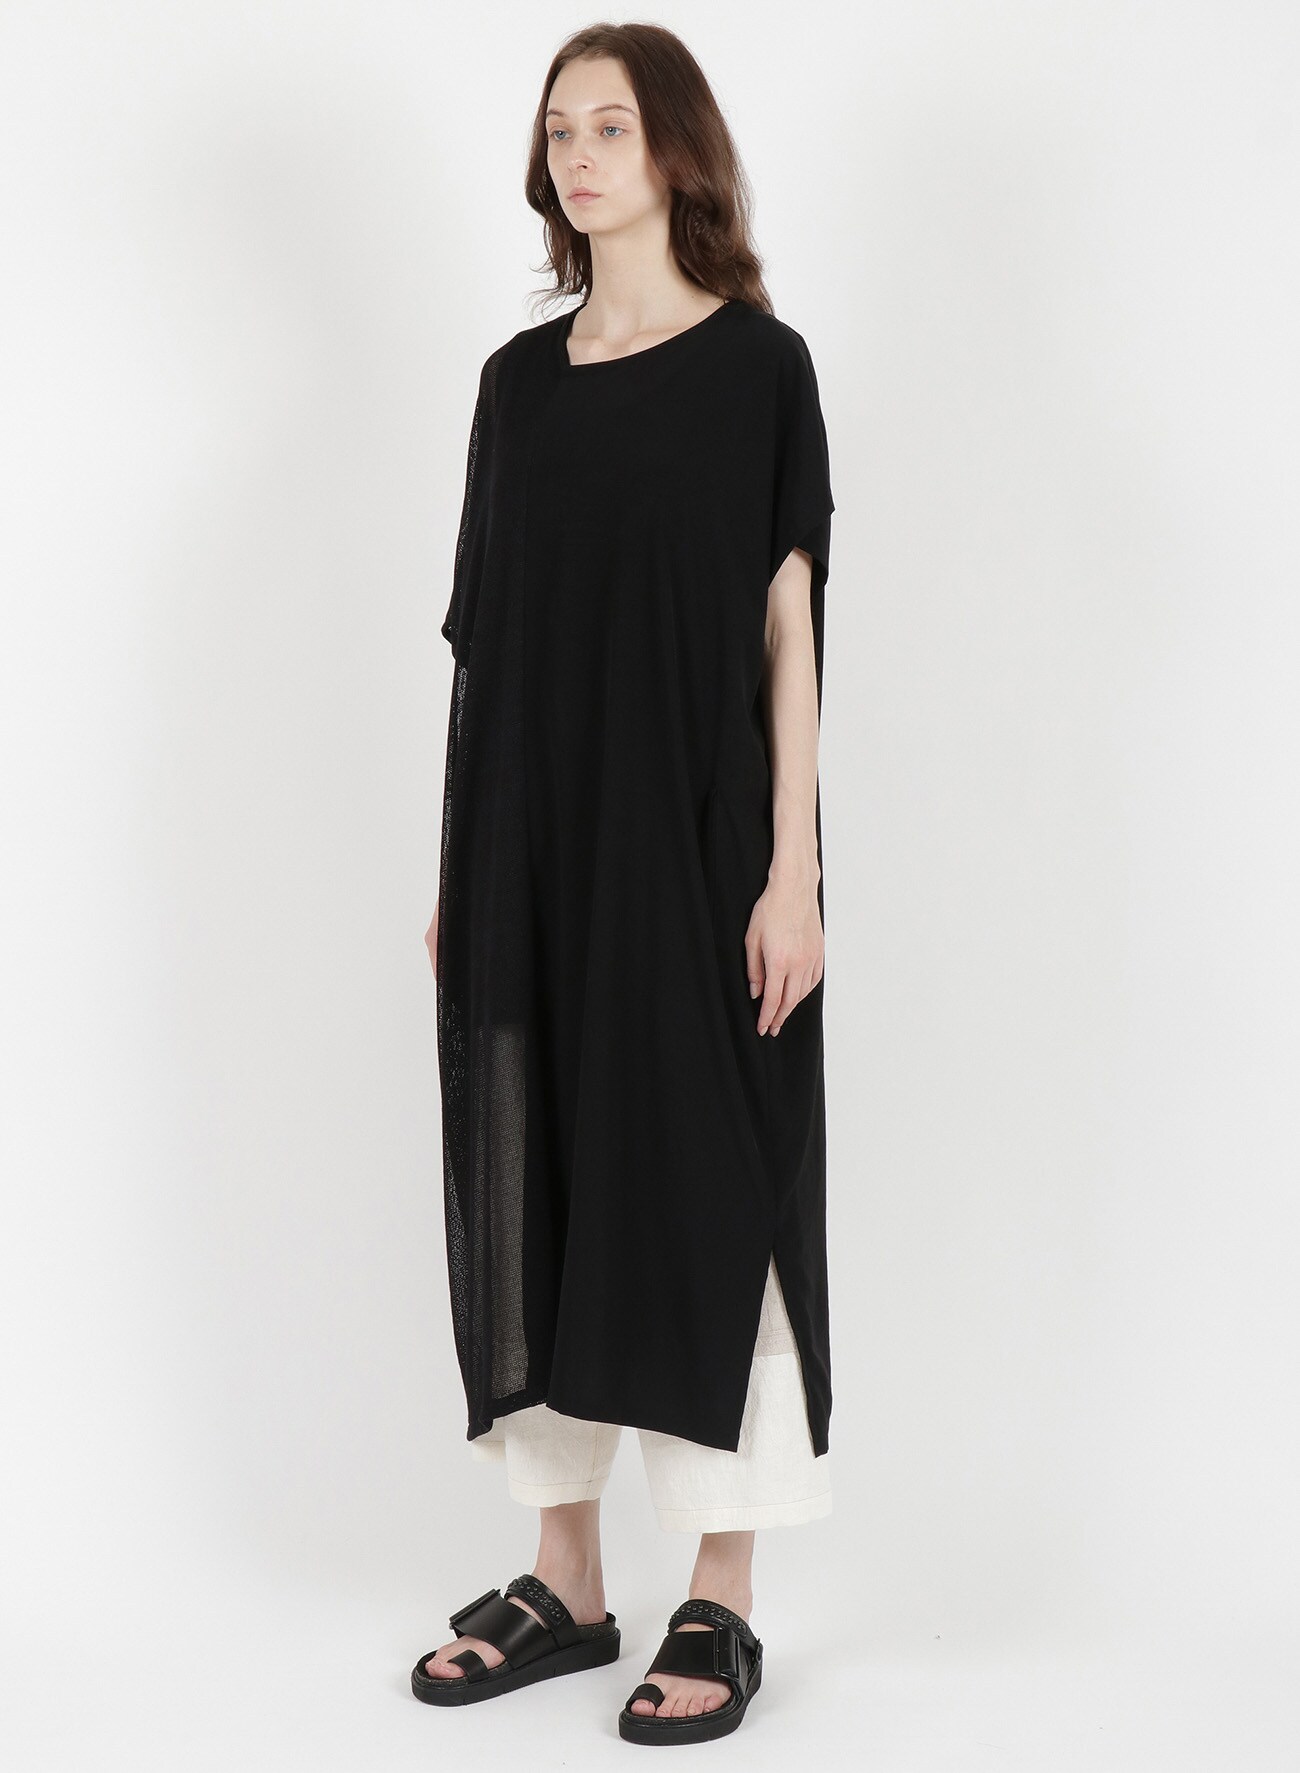 COTTON FAUX LINEN KNIT x TRIACETATE POLYESTER de CHINE RIGHT LAYERED FRENCH DRESS